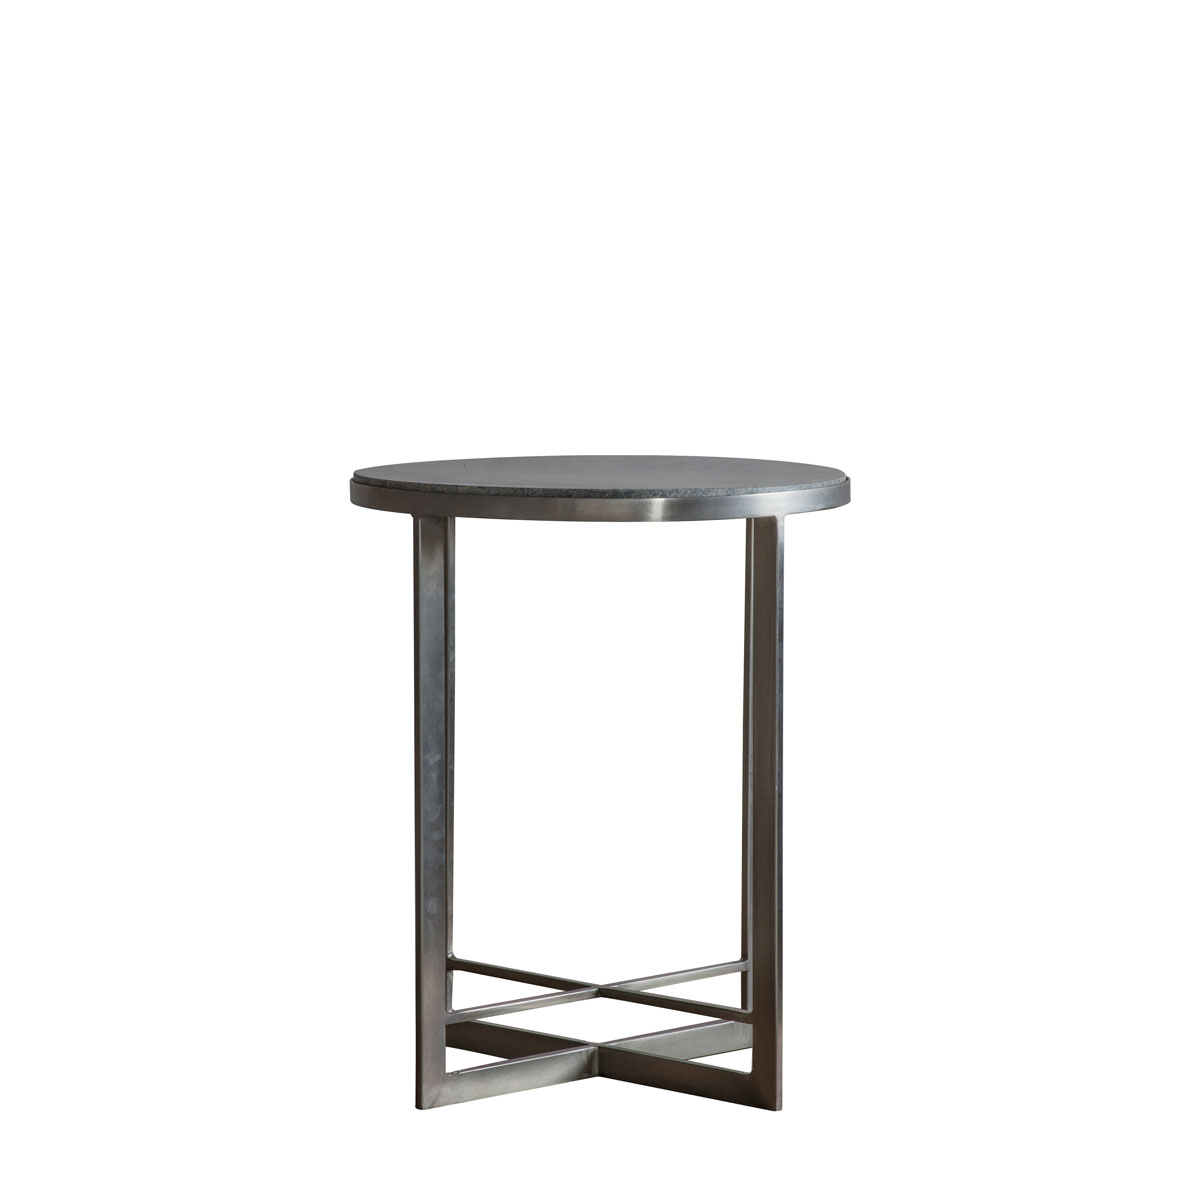 Necton Side Table Silver 460x460x560mm